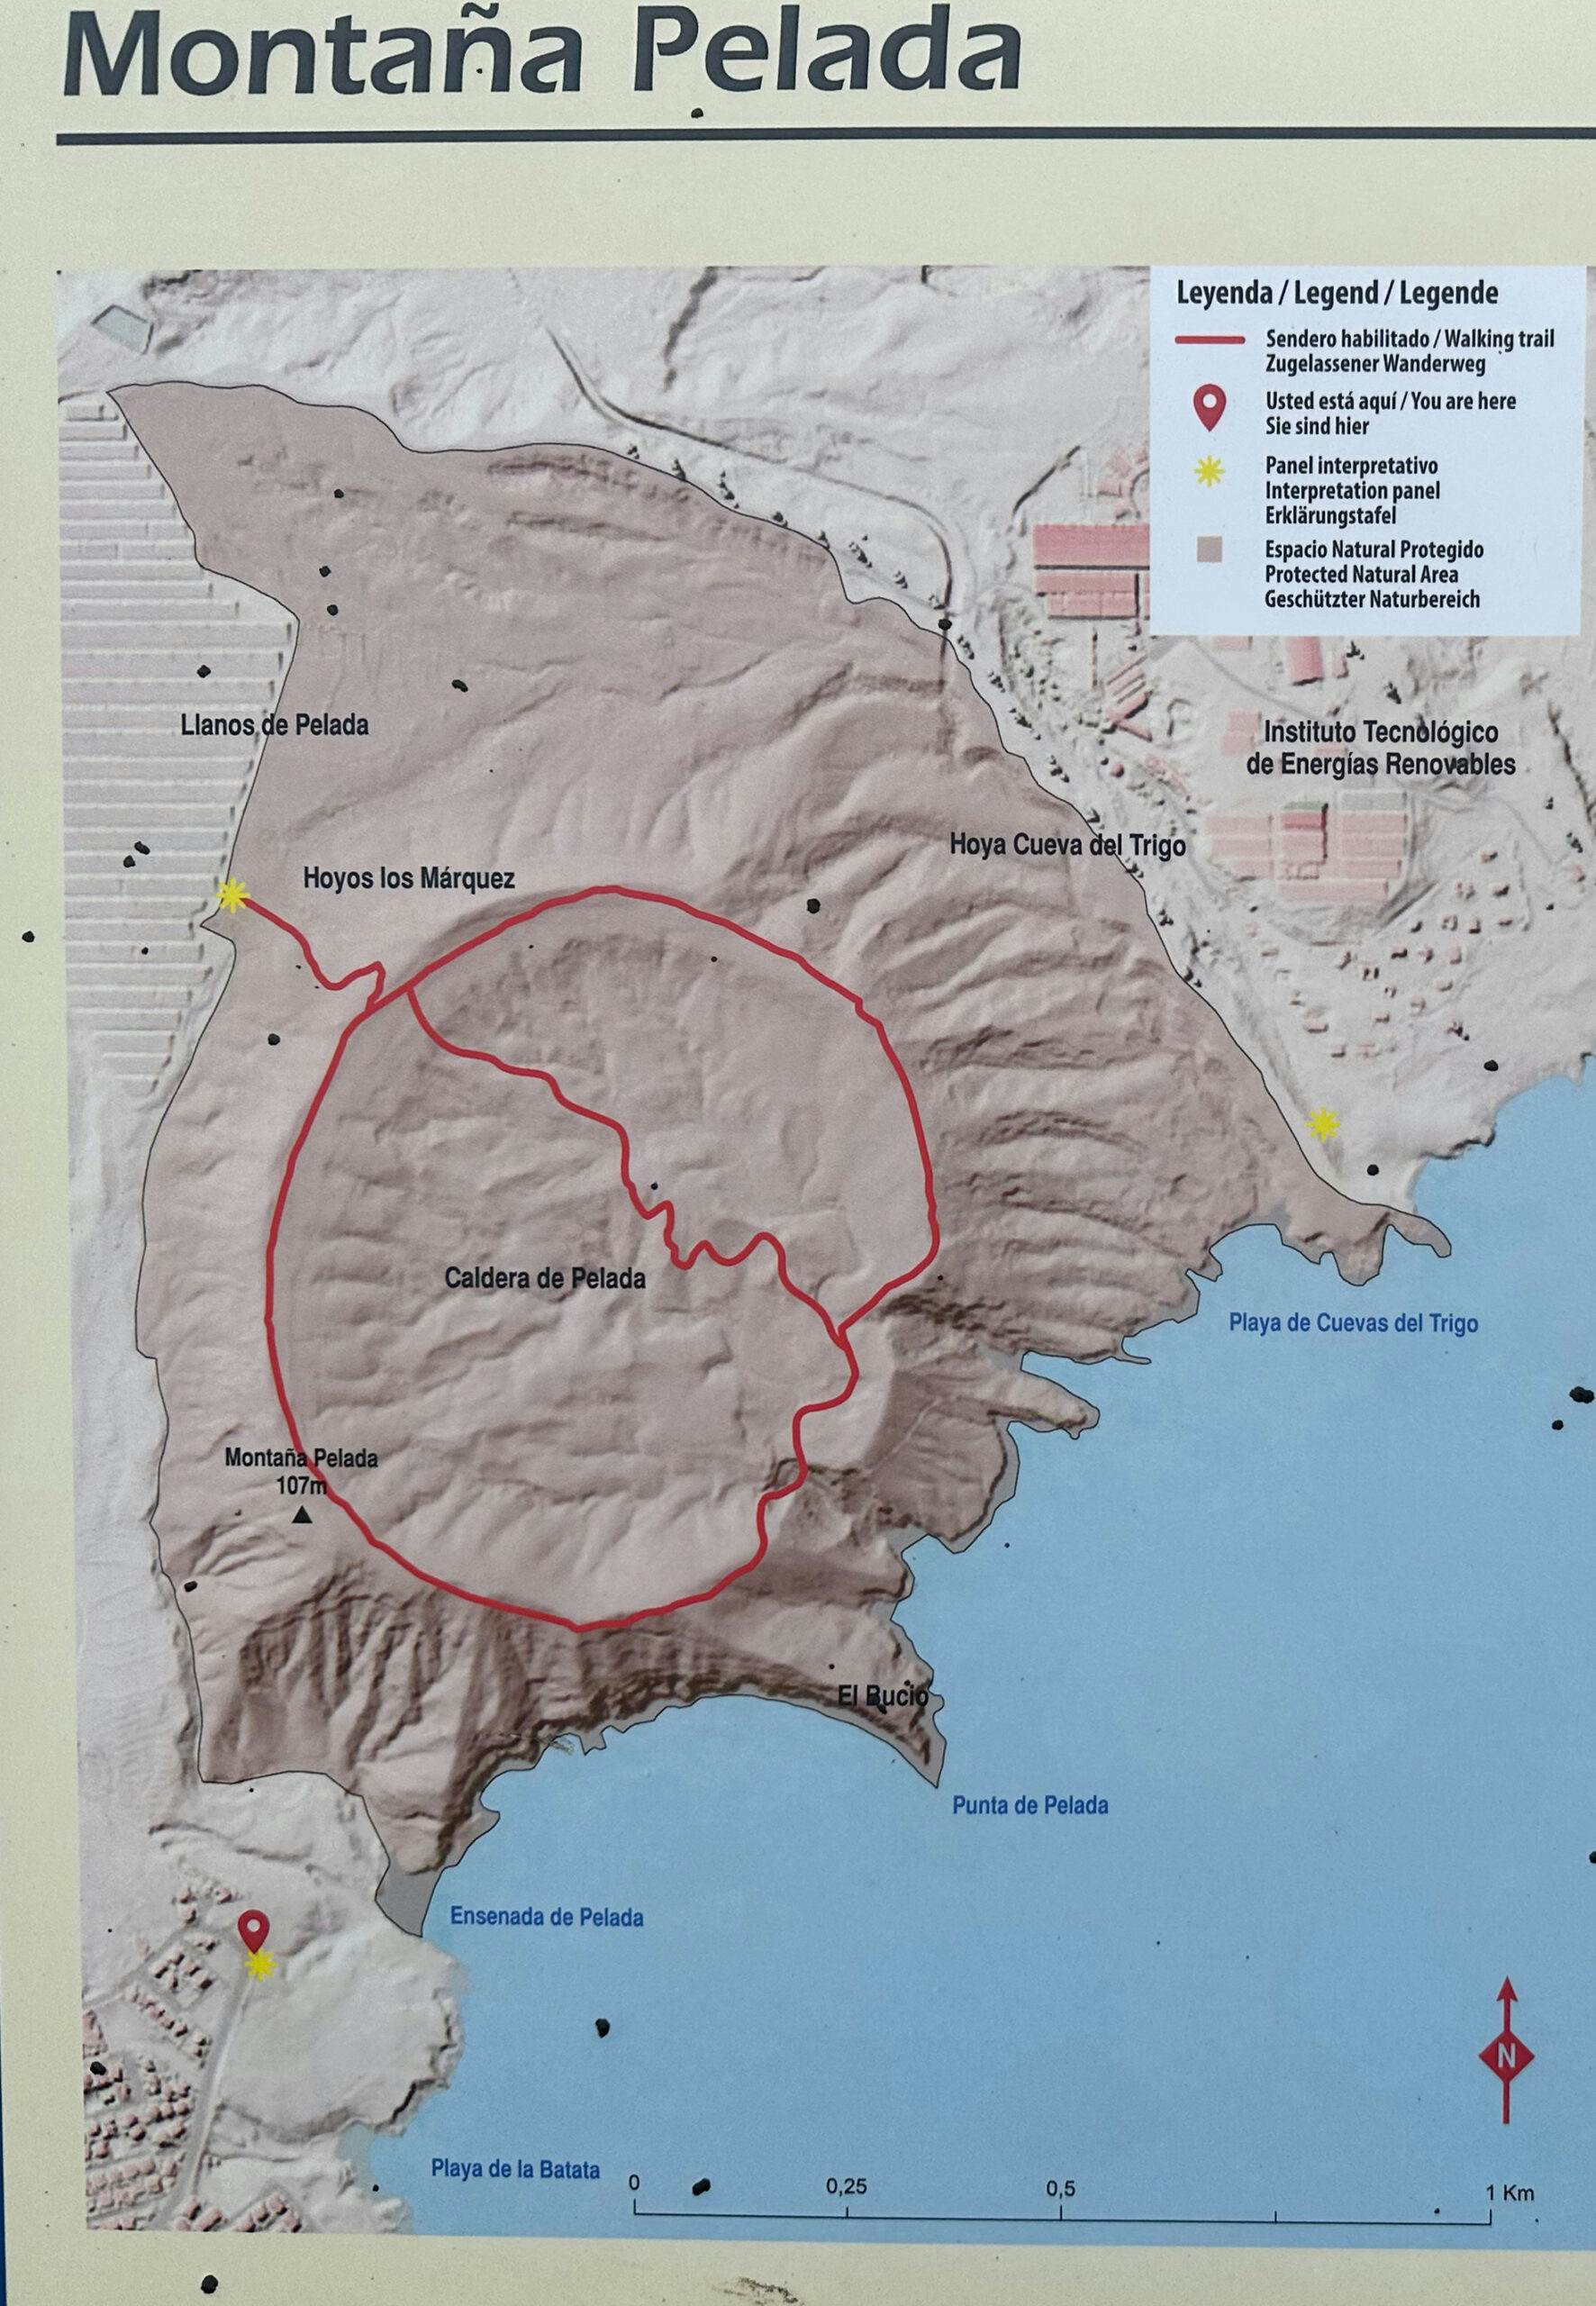 Information board for the Montaña Pelada hiking trail with hiking trail and crossing of the crater